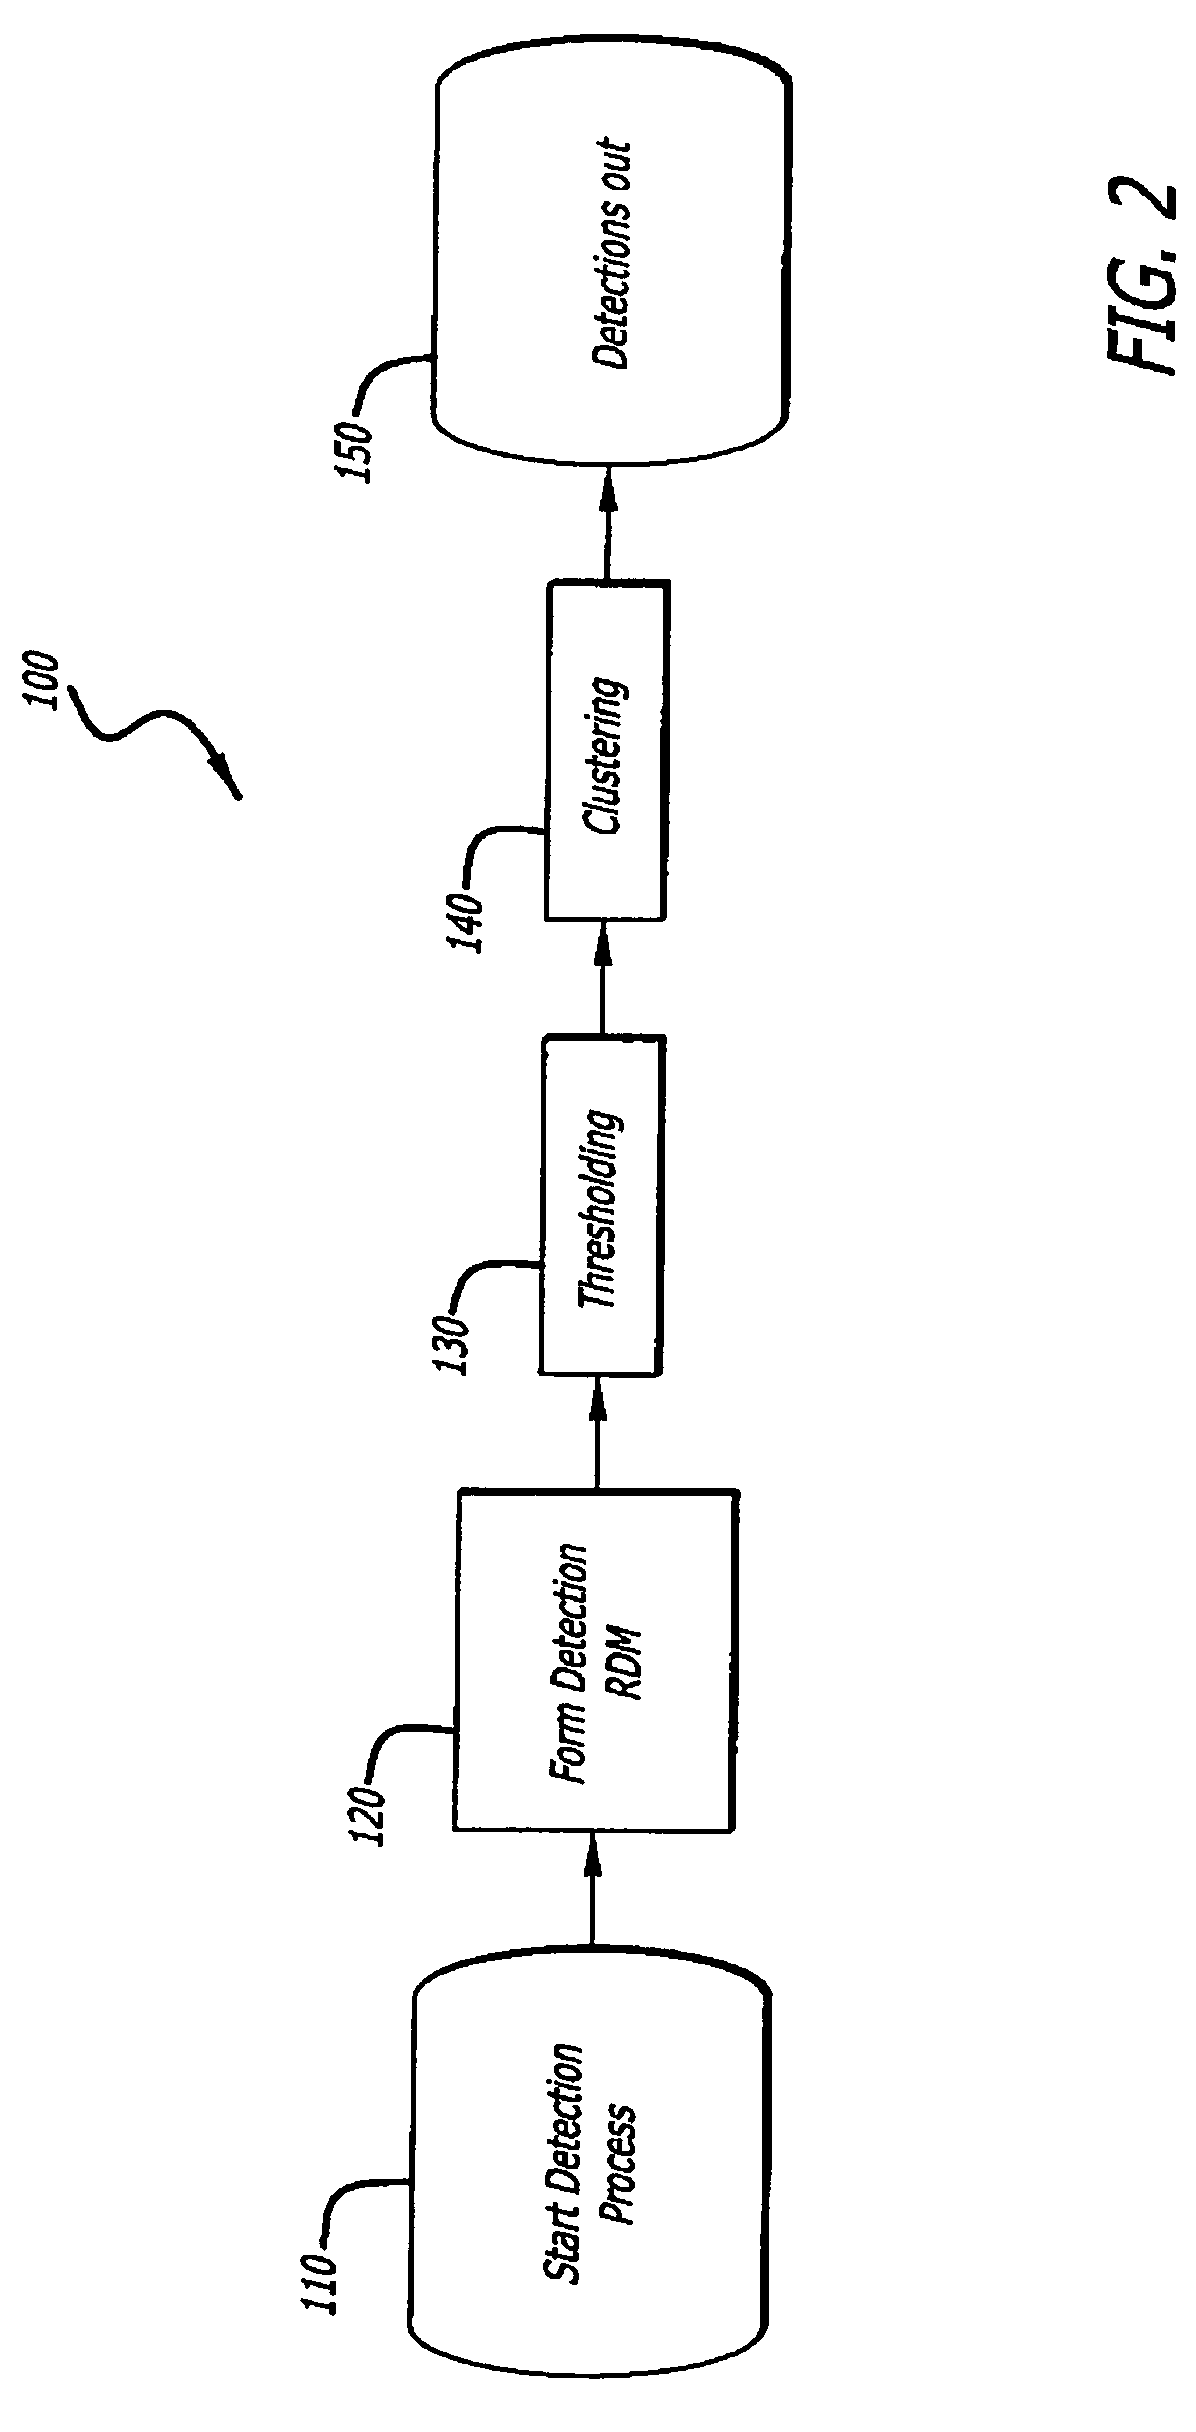 Radar imaging system and method using directional gradient magnitude second moment spatial variance detection